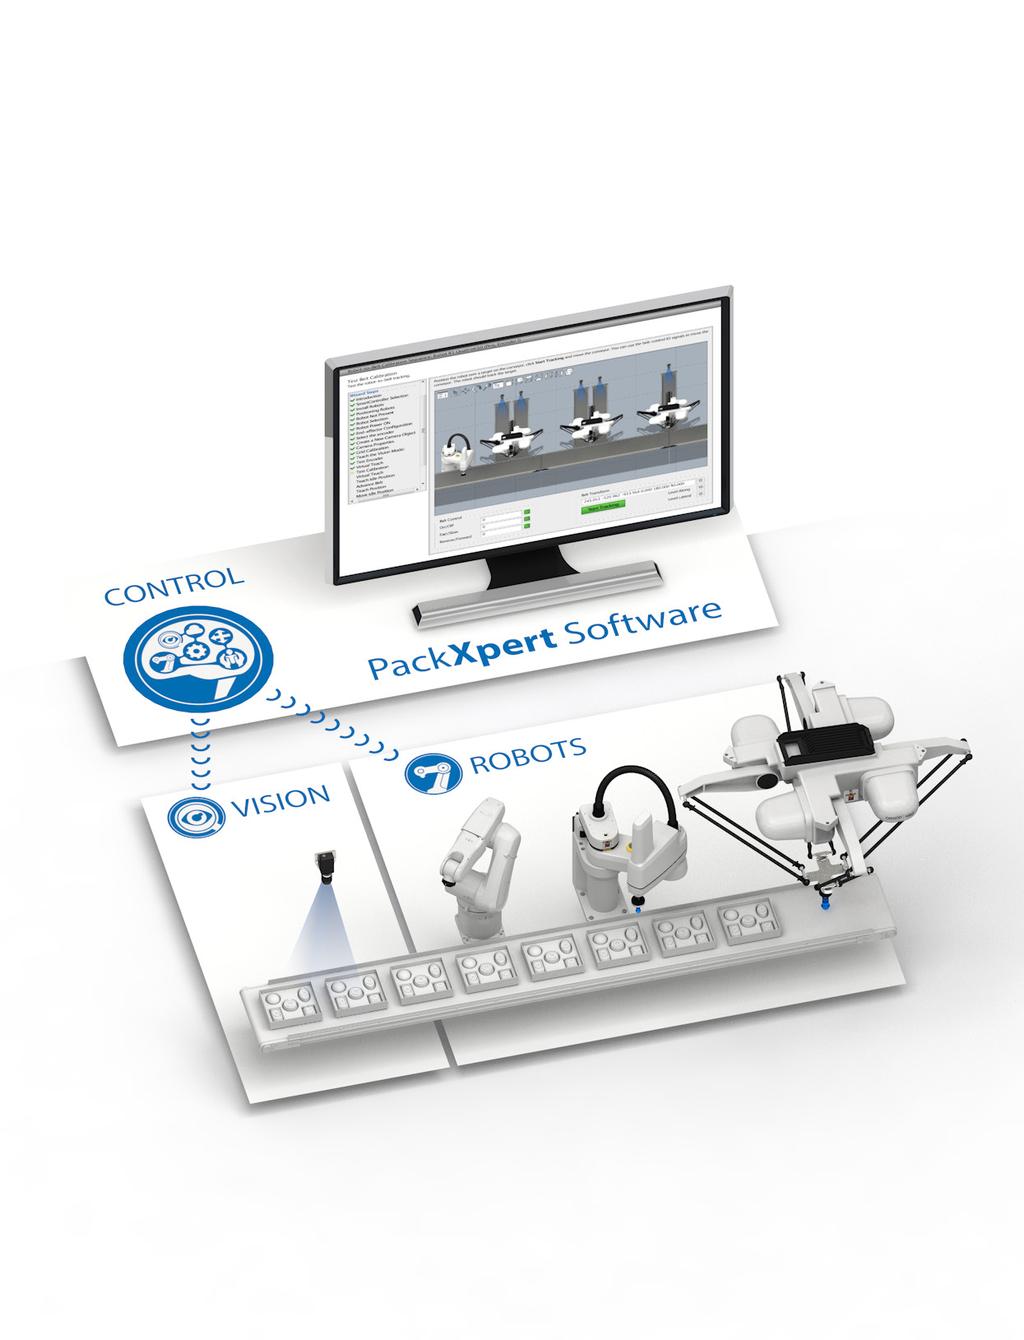 Omron PackXpert Complete Packaging Solution One Company, One Solution Omron products make it easy to automate.